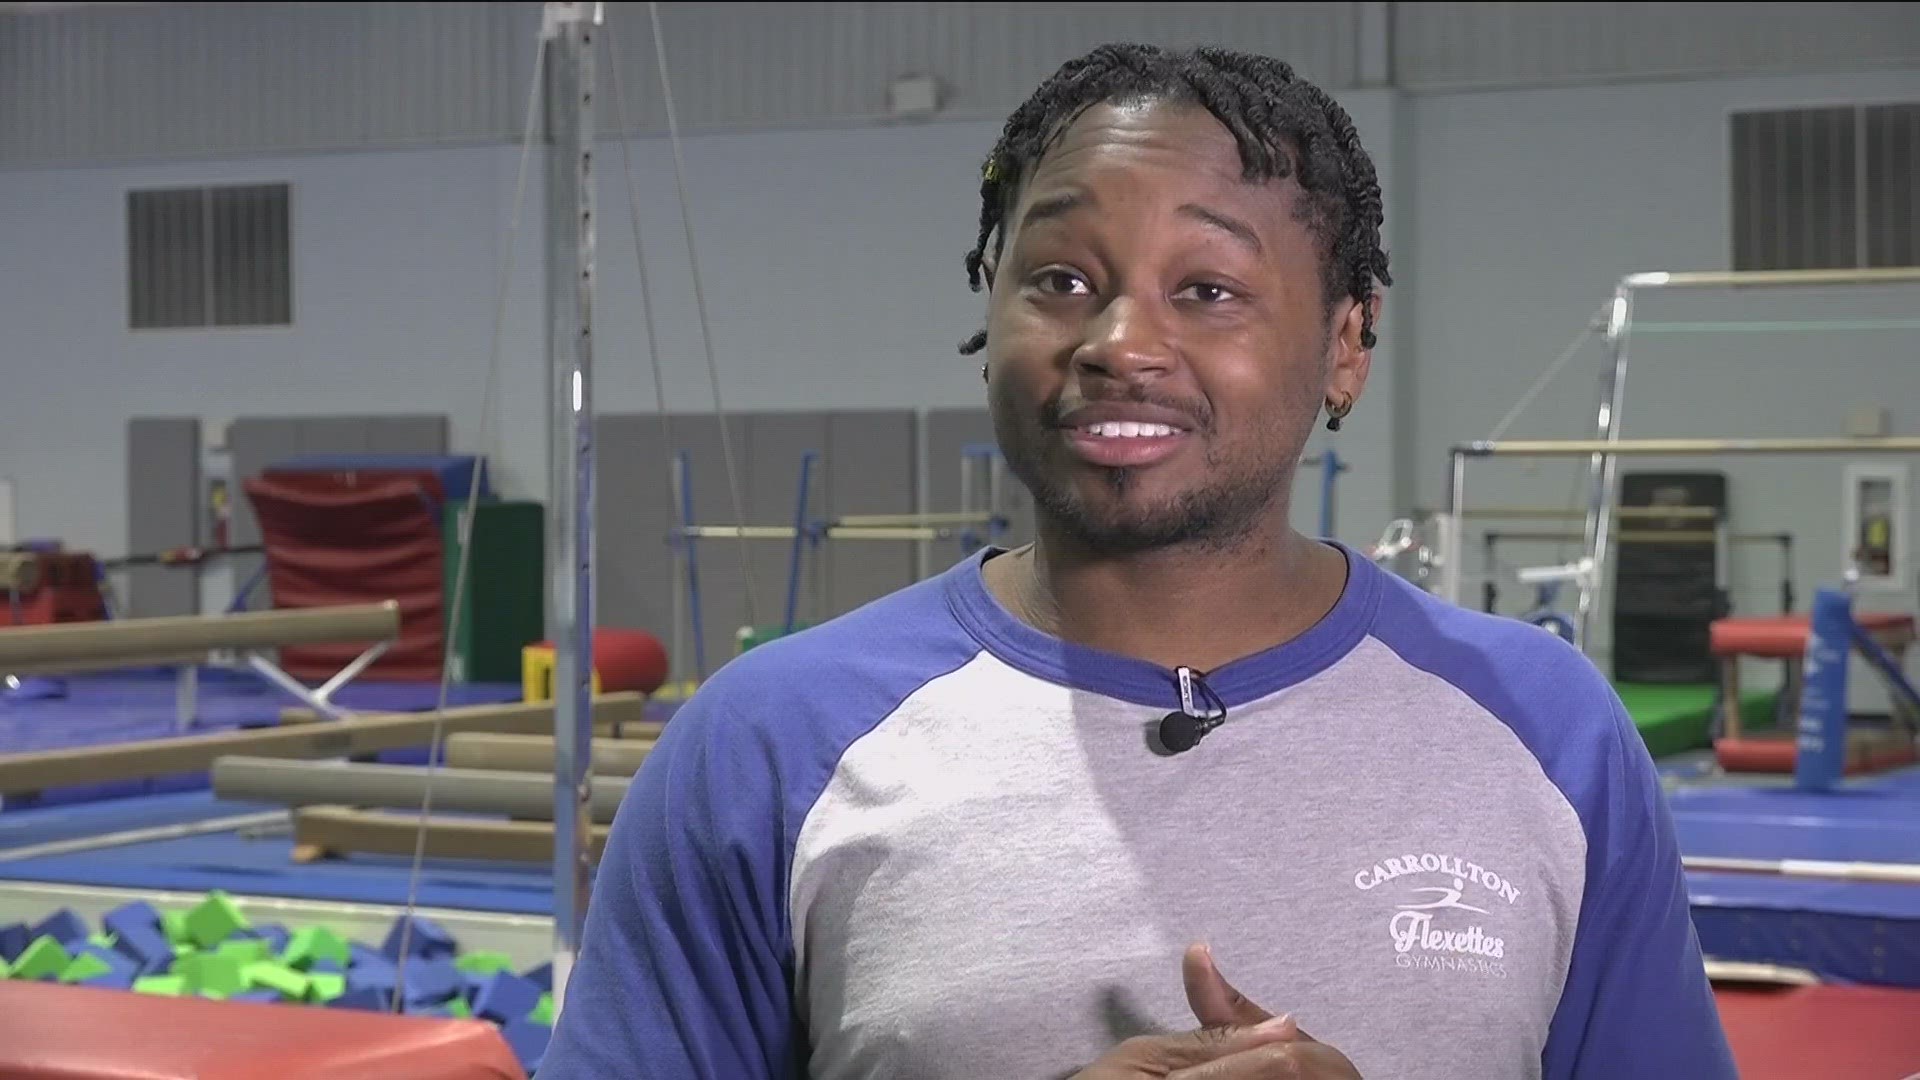 Dante Sipp is looking back on the procedure that changed his life forever.